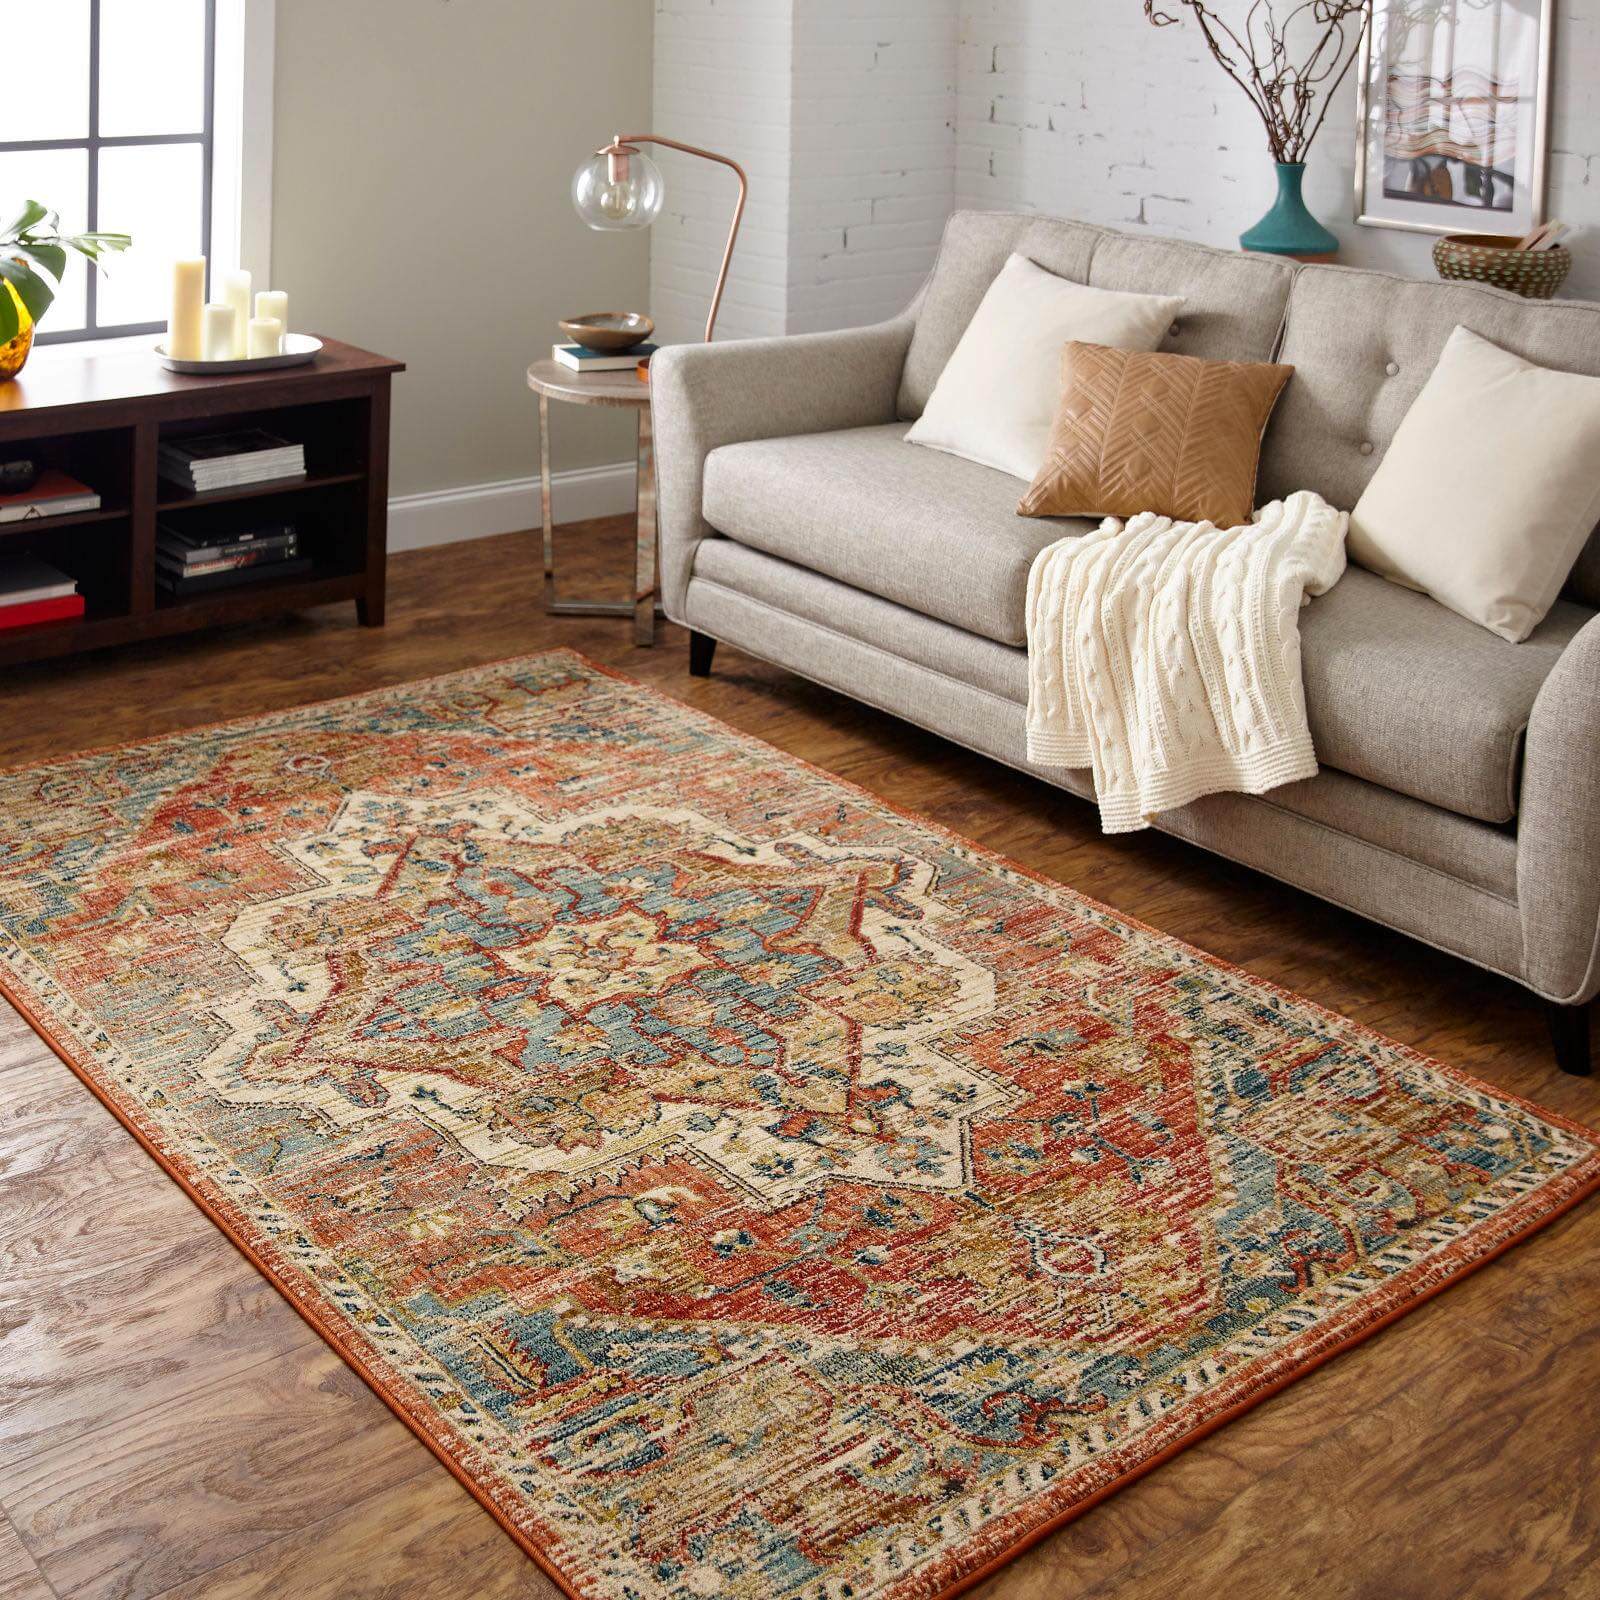 Area Rug for living room | Flooring Expressions